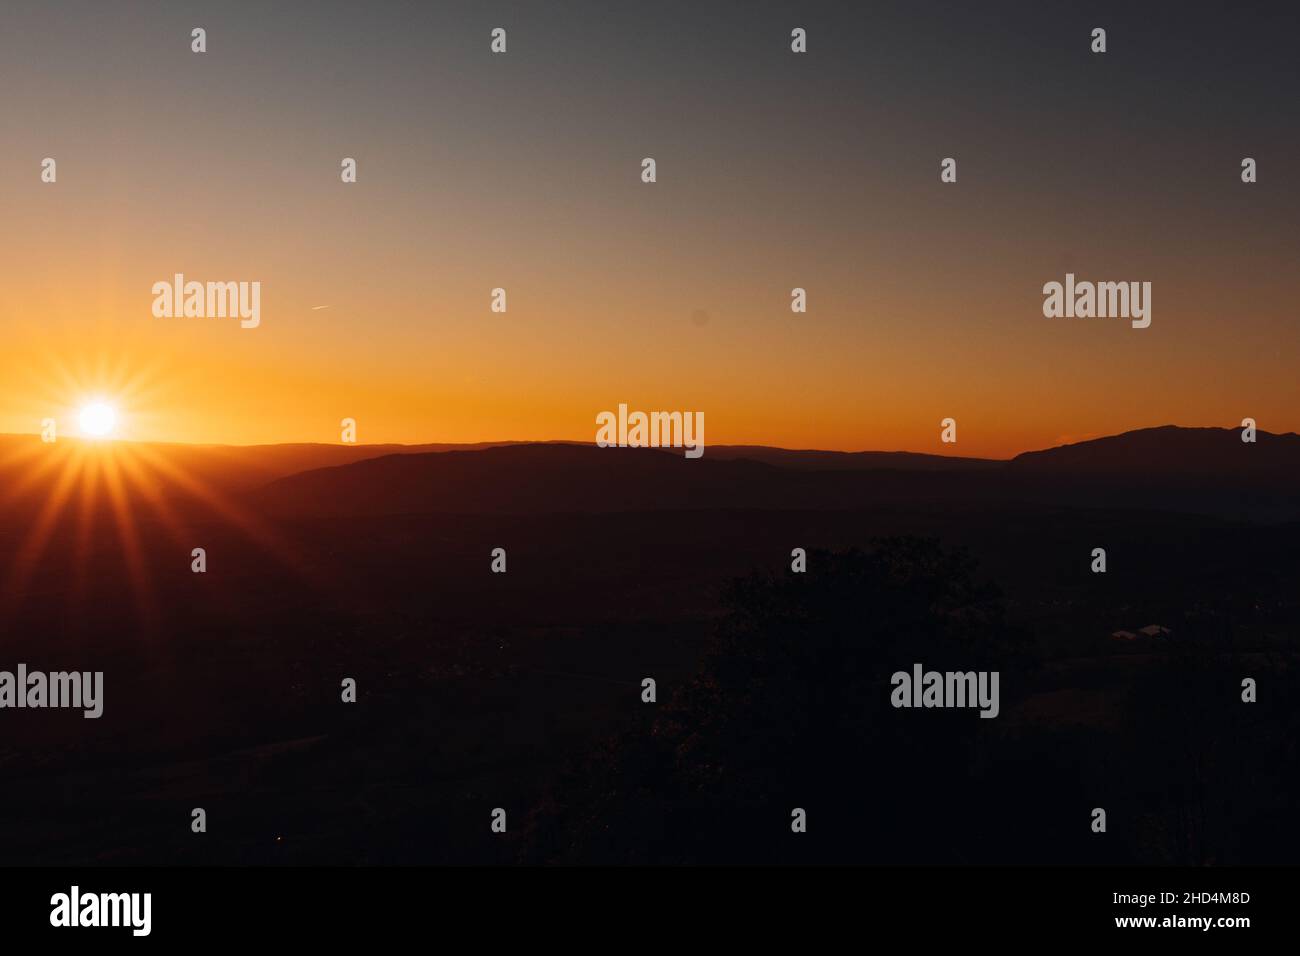 Beautiful sunset view over hilly terrain Stock Photo